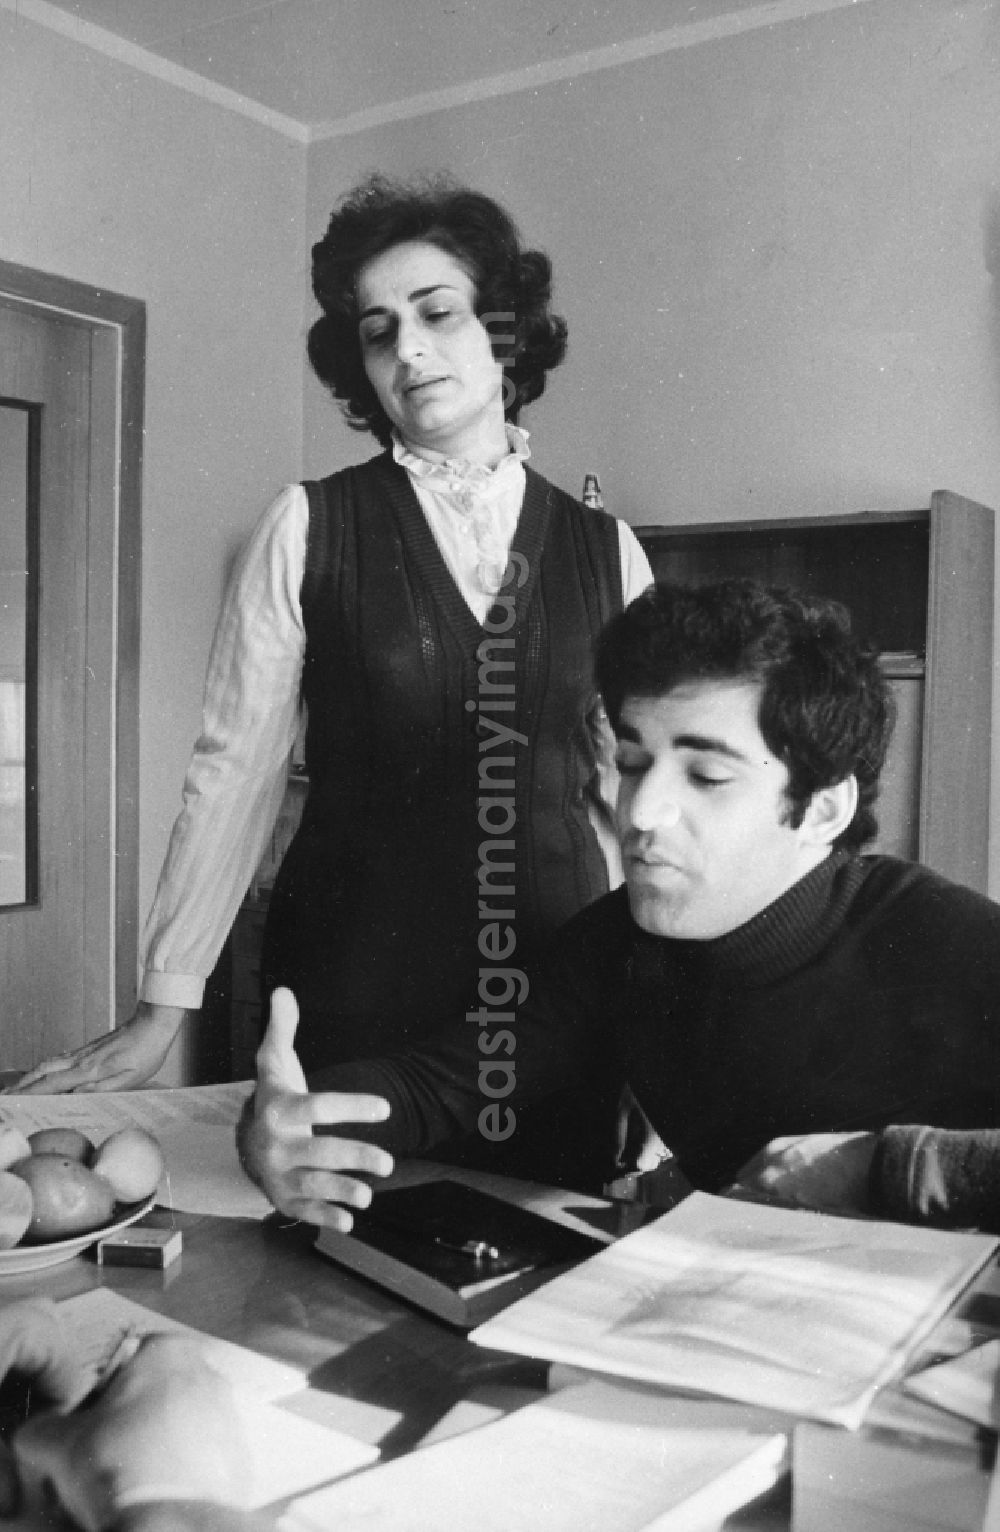 GDR image archive: Moskau - The former Russian chess champion Garry Kasparov in Moscow. Here, with his mother, Klara Schagenowna Kasparjan